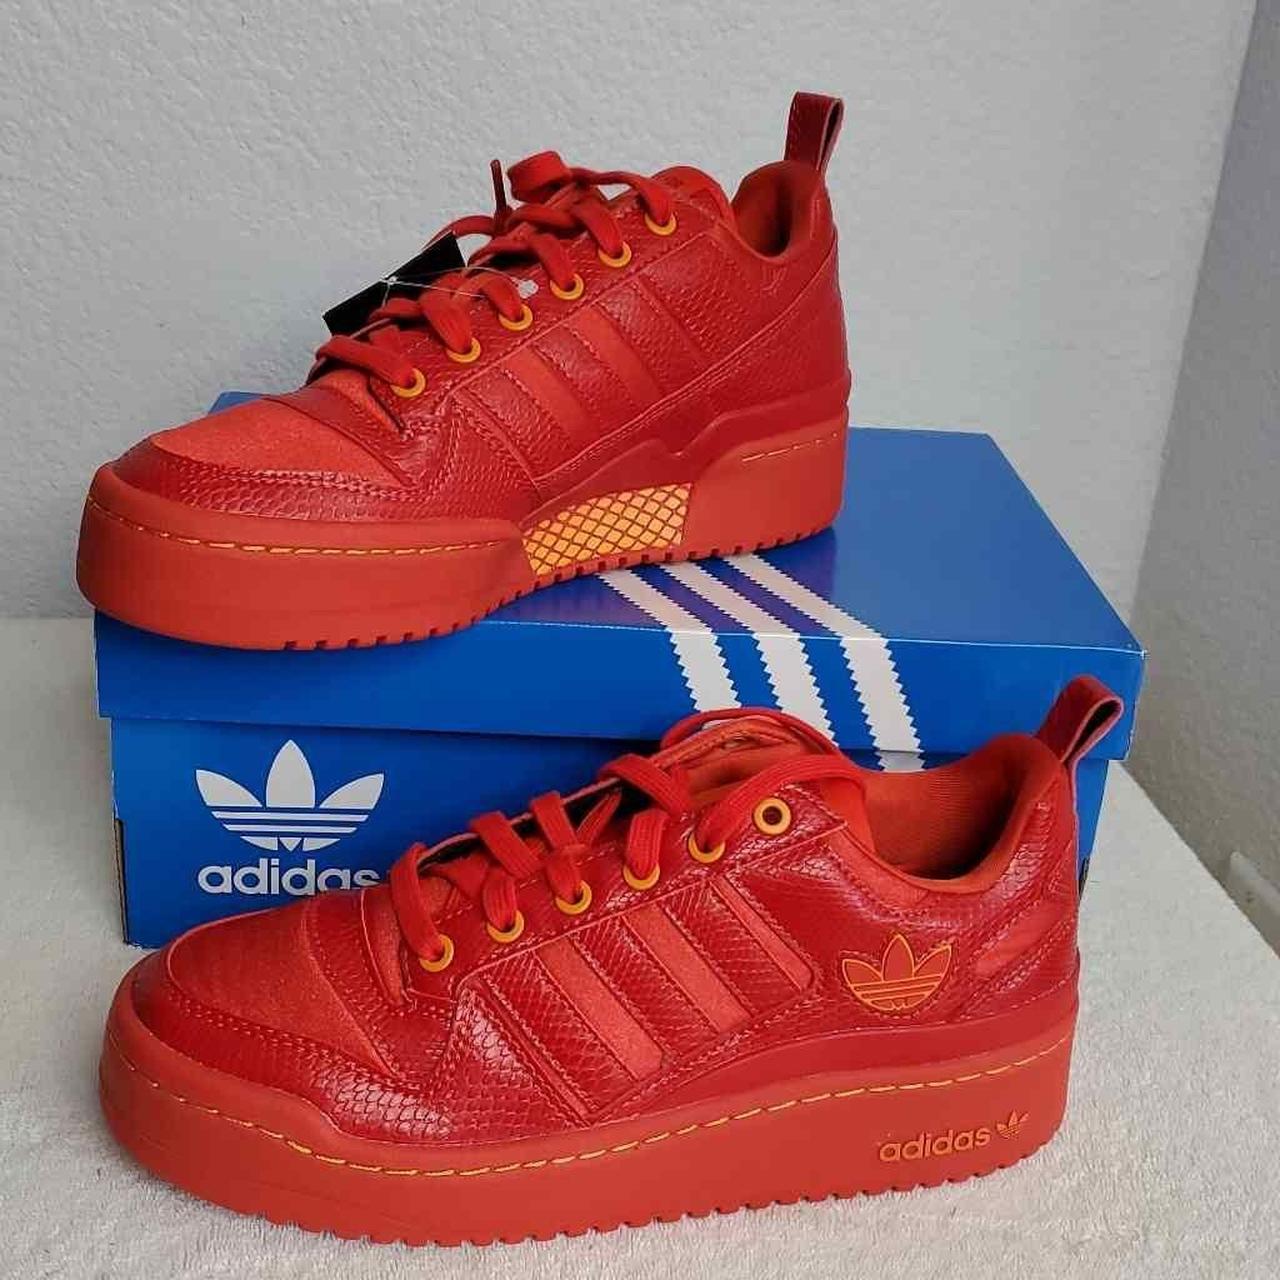 Adidas Red and Gold | Depop